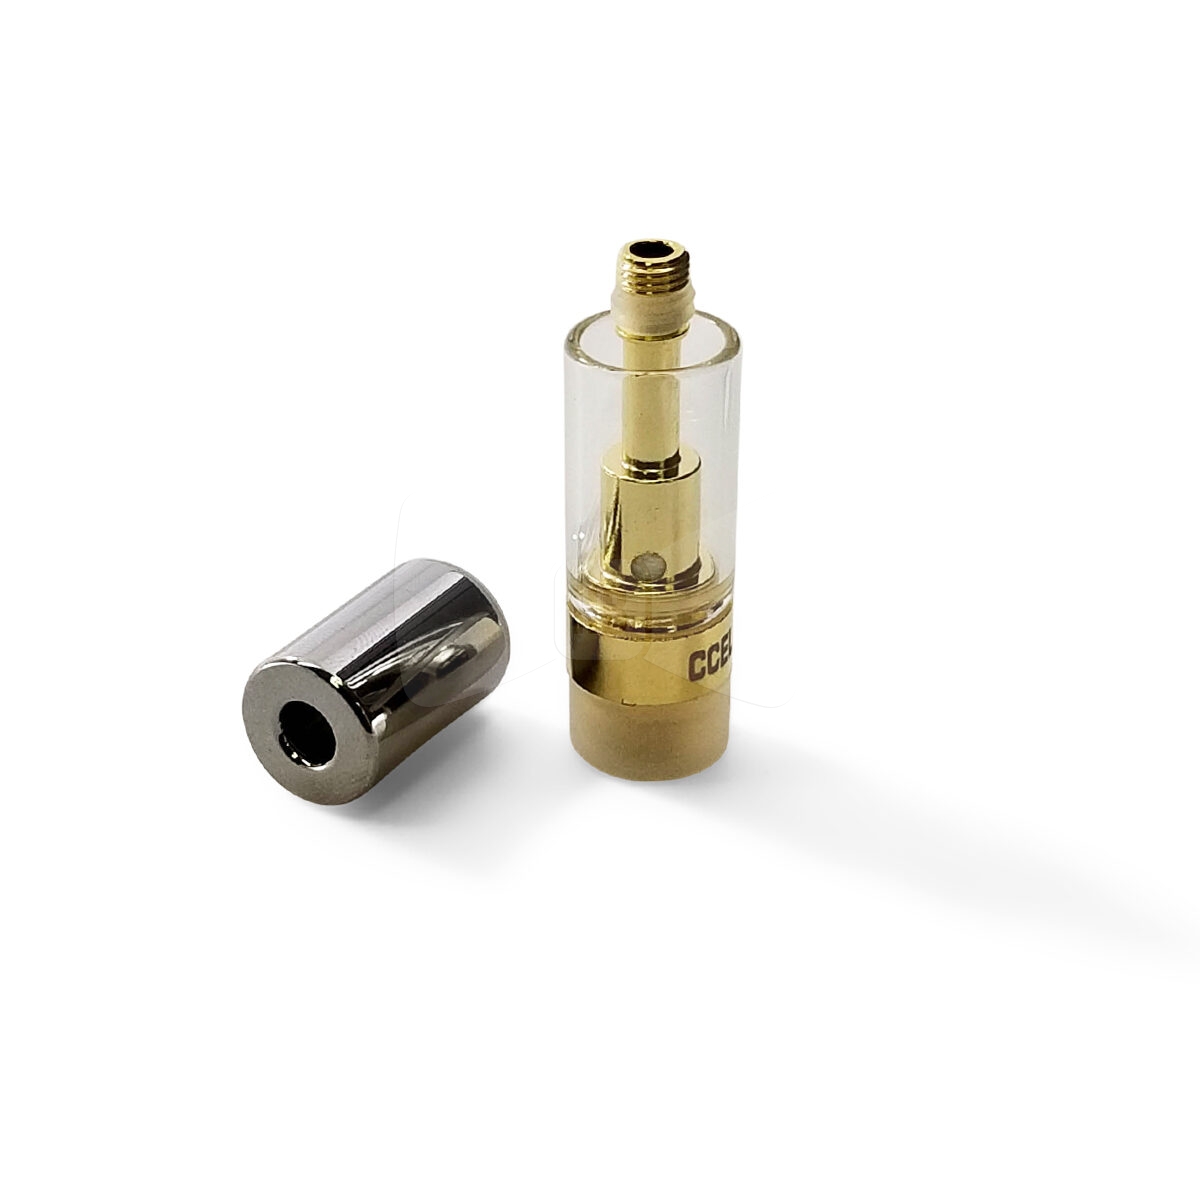 CCell Threaded Cartridge & Mouthpiece Gold .5ML Silver Barrel